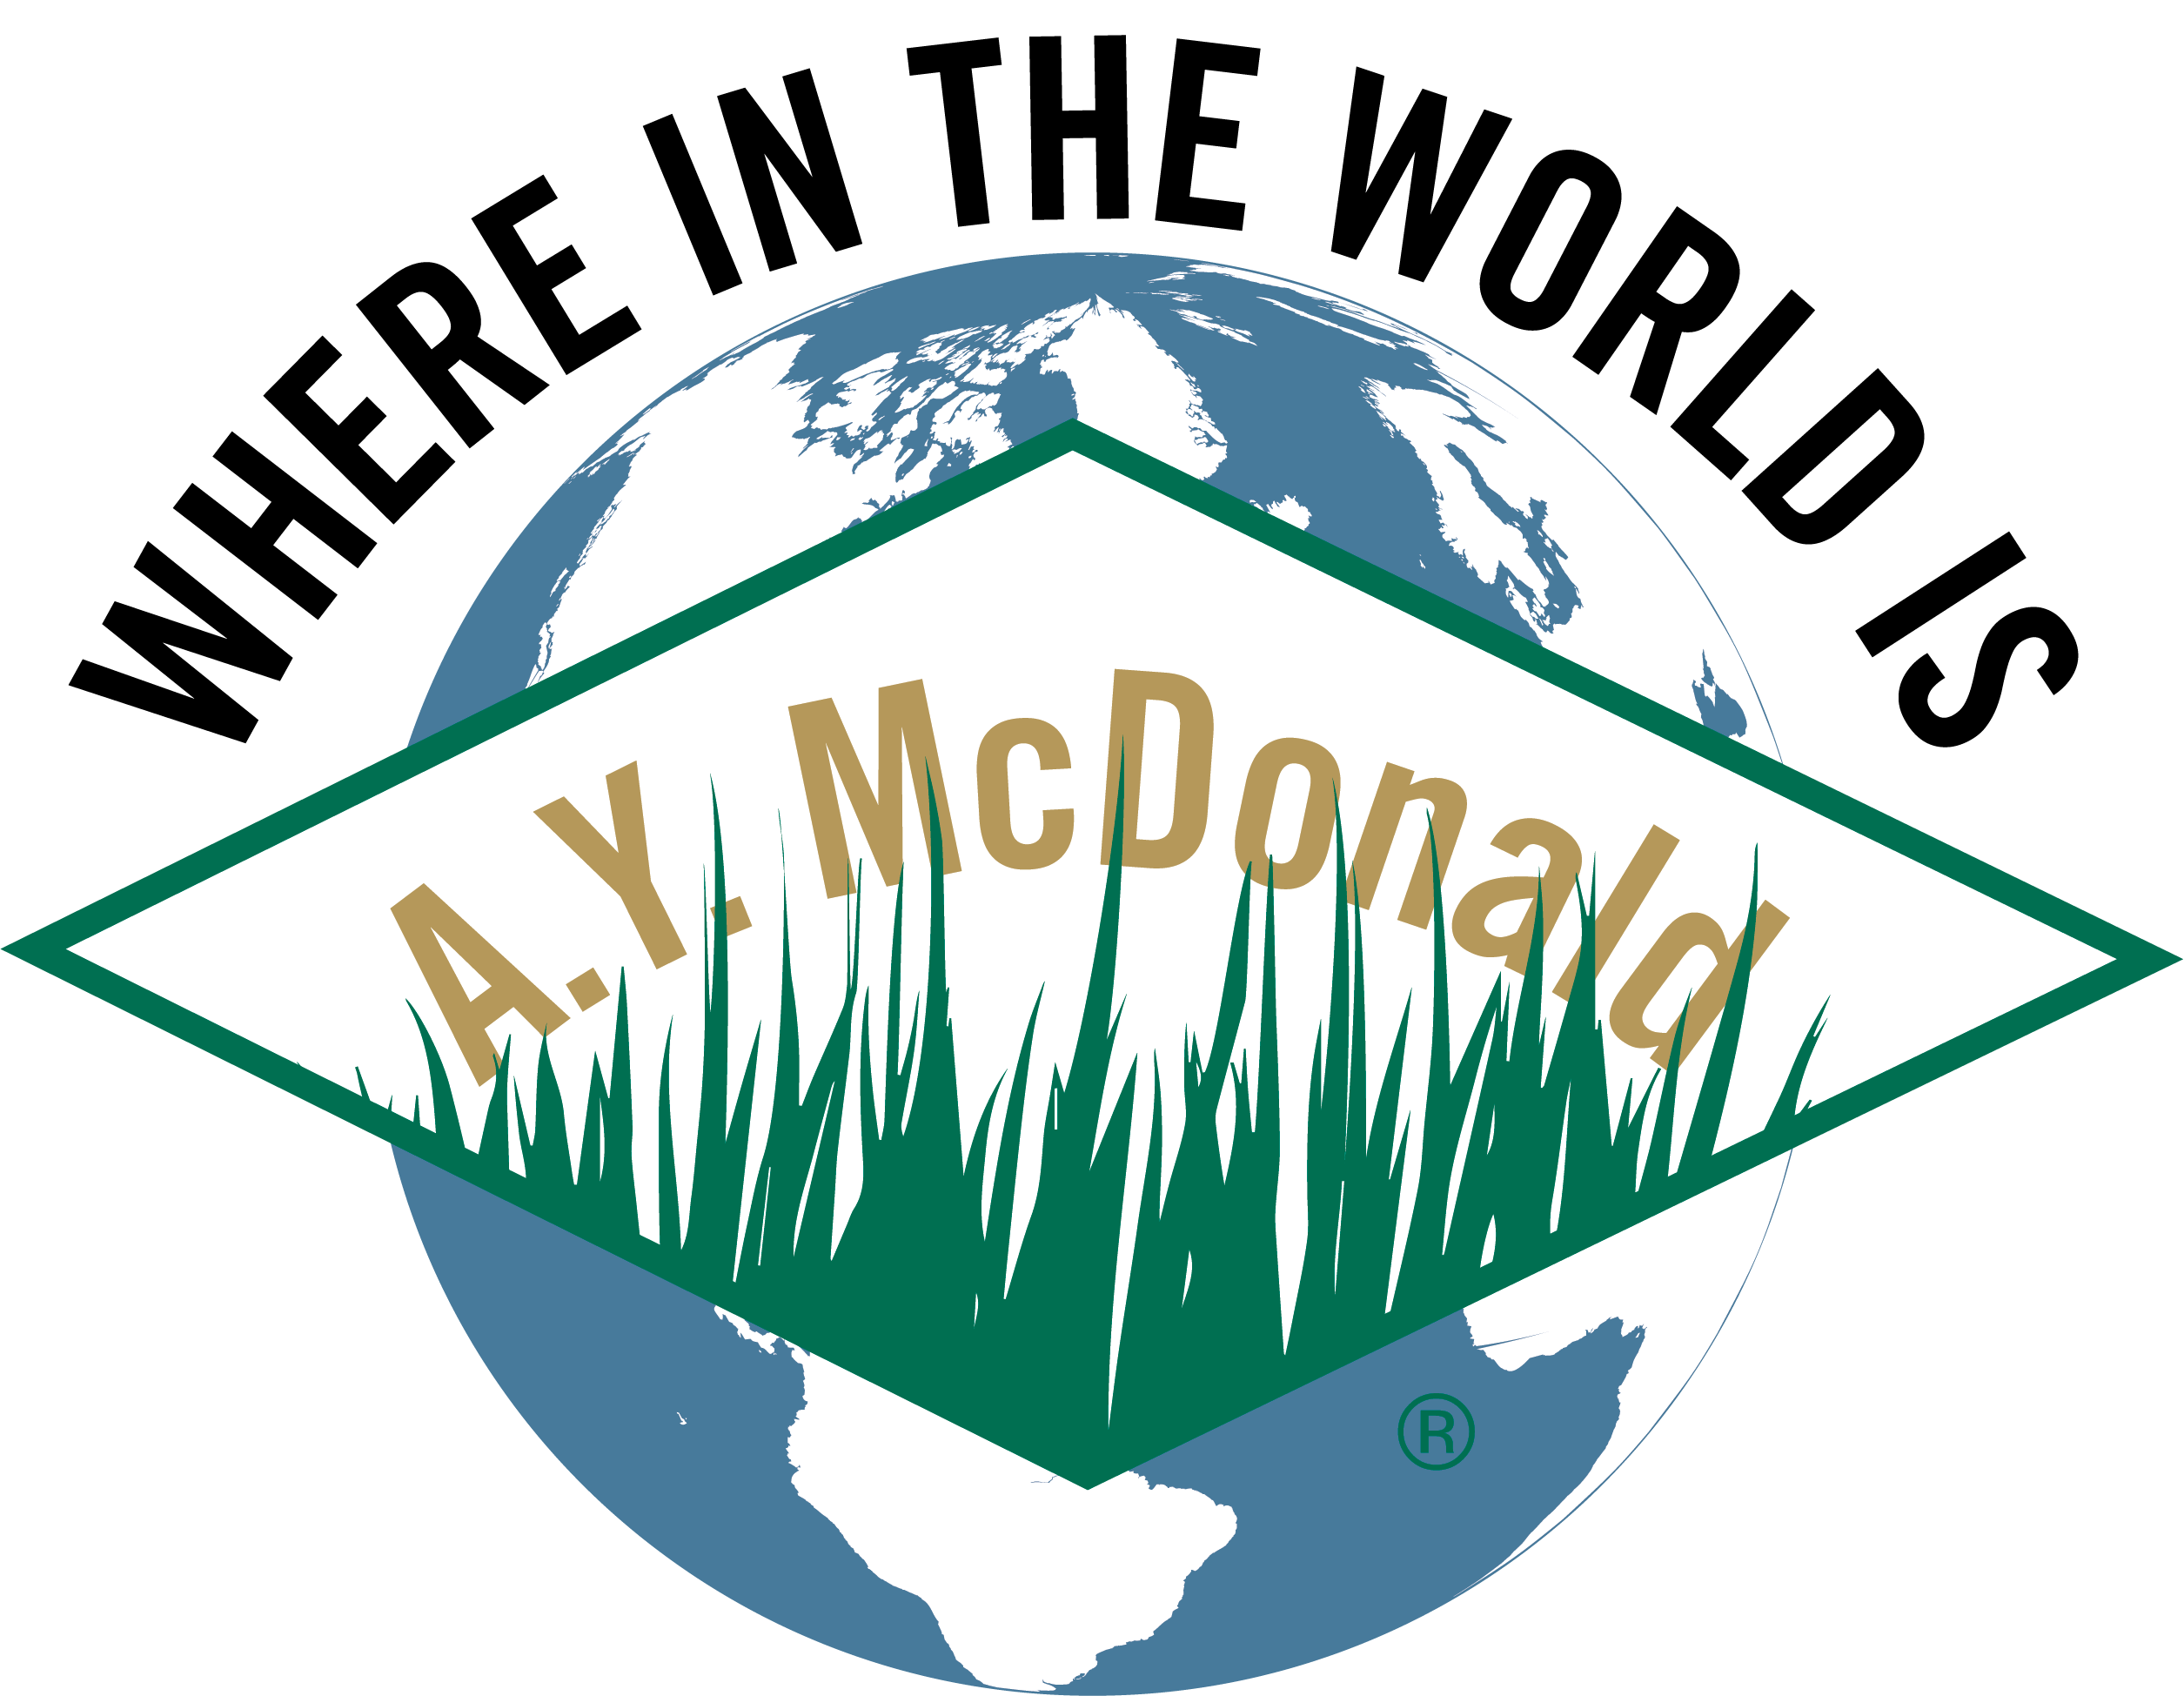 ‘Where in the World is A.Y. McDonald’ Giveaway